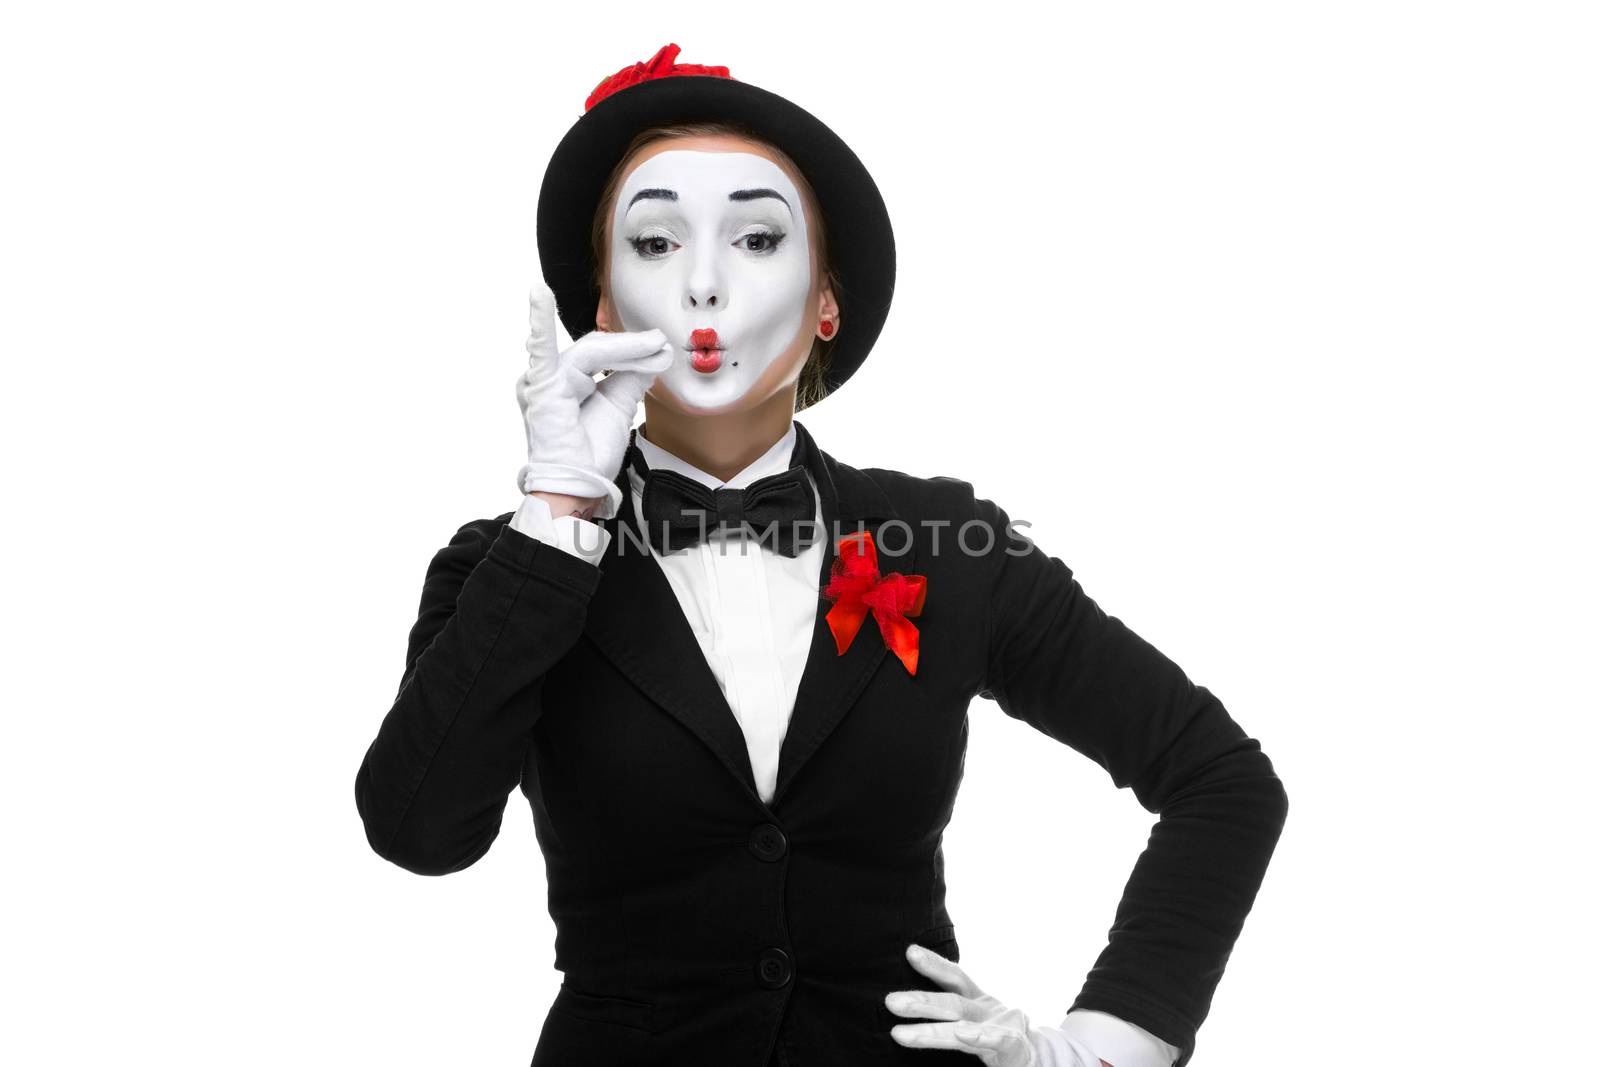 Portrait of the approving woman as mime showing something very small in size, isolated on white background. 